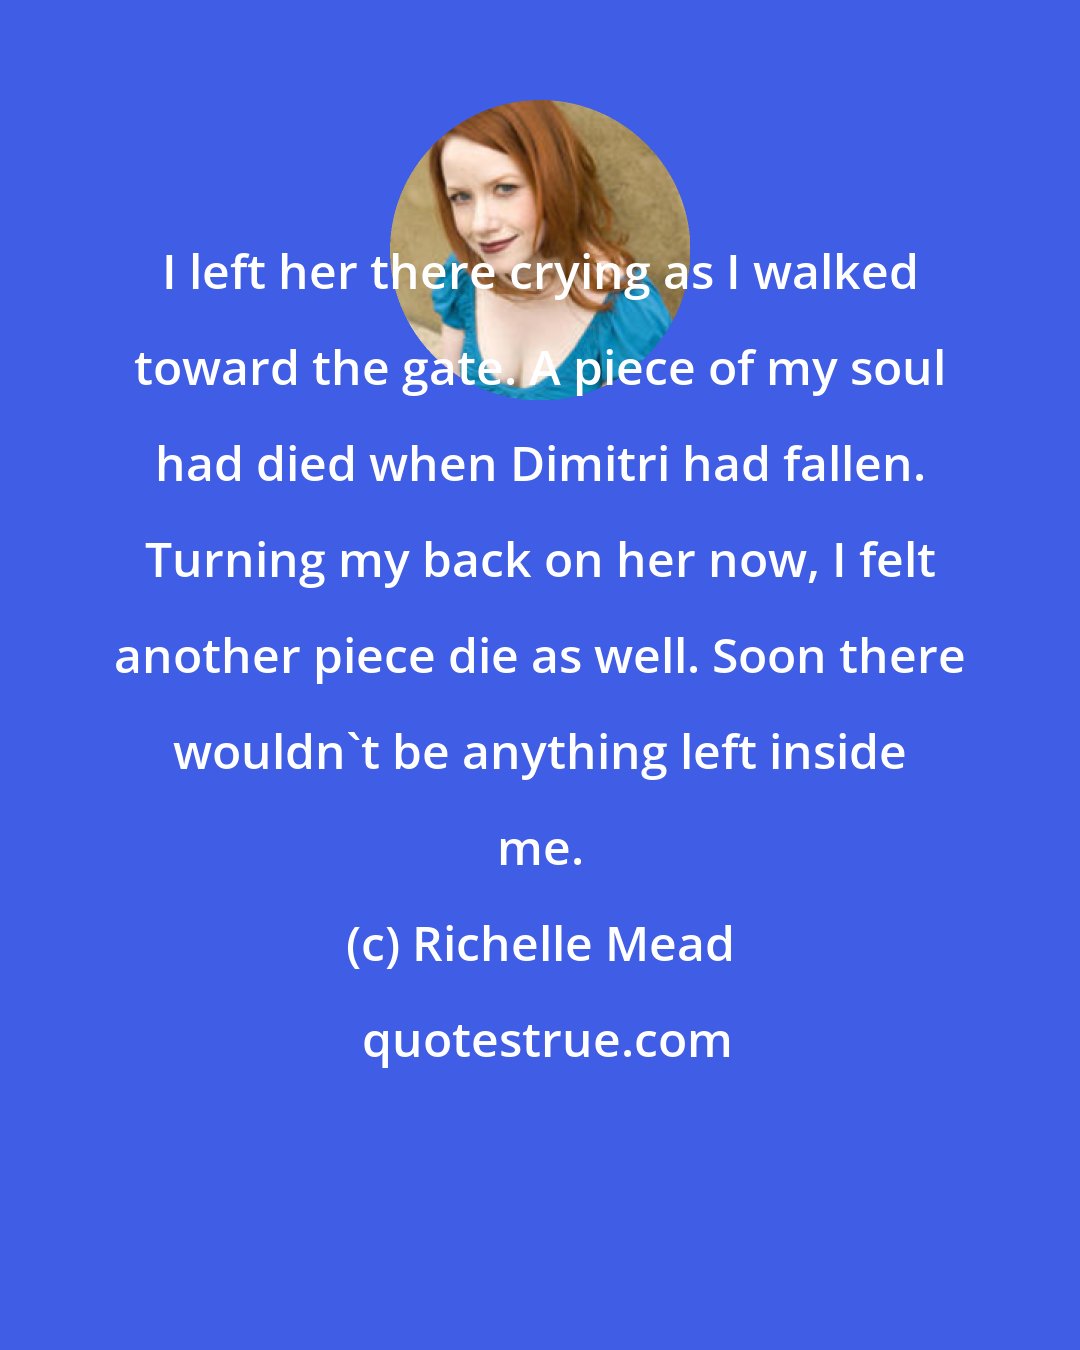 Richelle Mead: I left her there crying as I walked toward the gate. A piece of my soul had died when Dimitri had fallen. Turning my back on her now, I felt another piece die as well. Soon there wouldn't be anything left inside me.